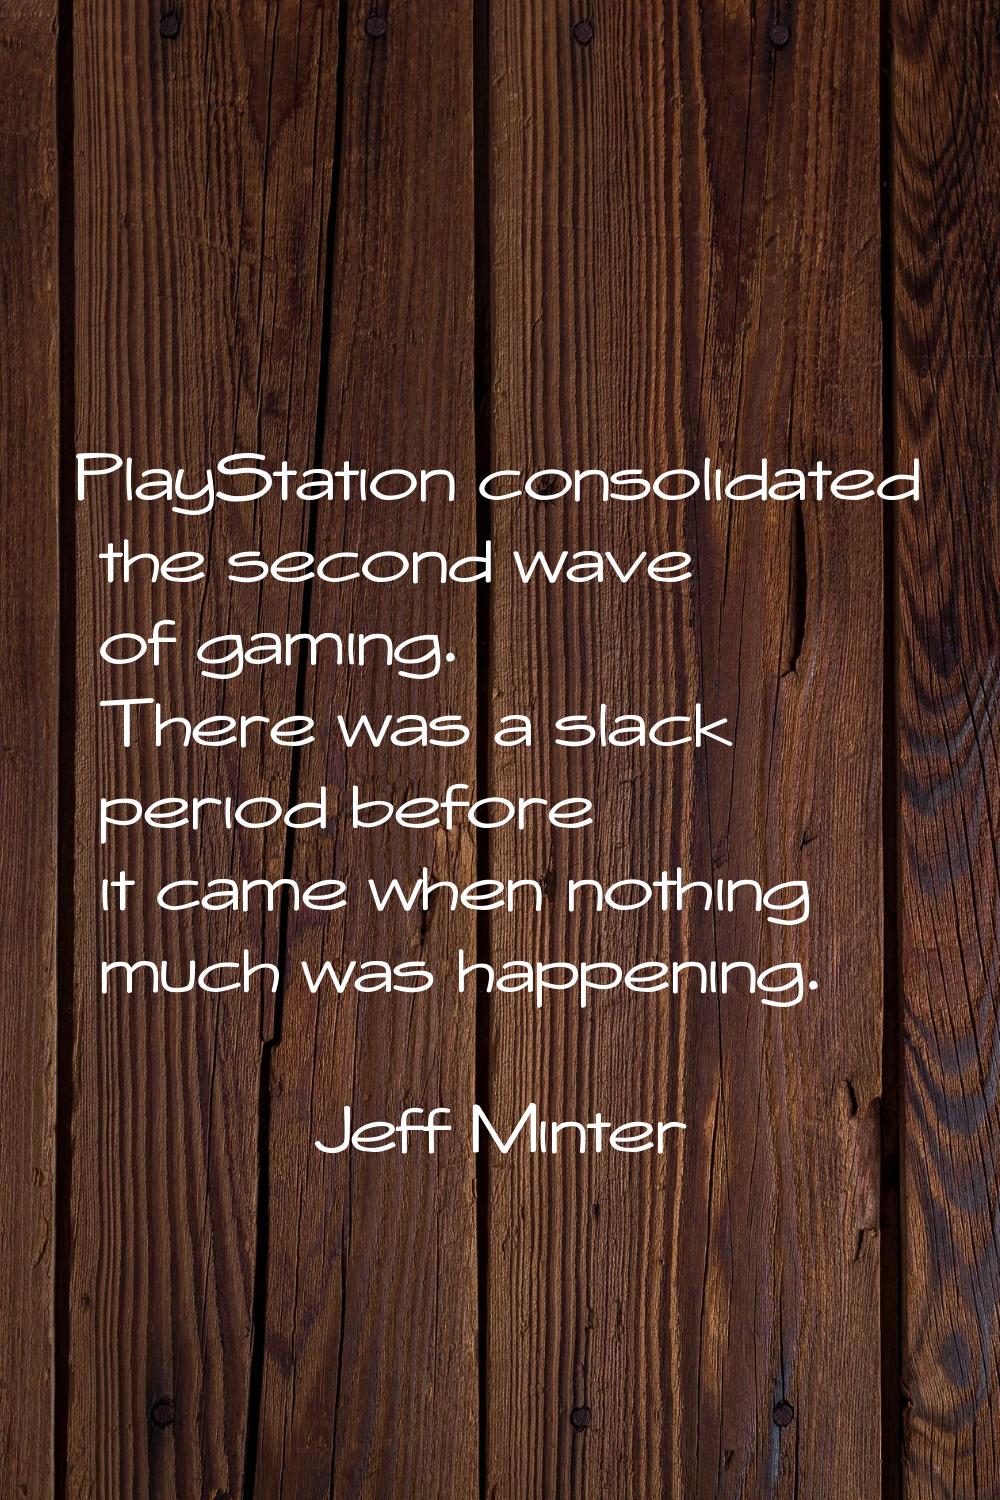 PlayStation consolidated the second wave of gaming. There was a slack period before it came when no